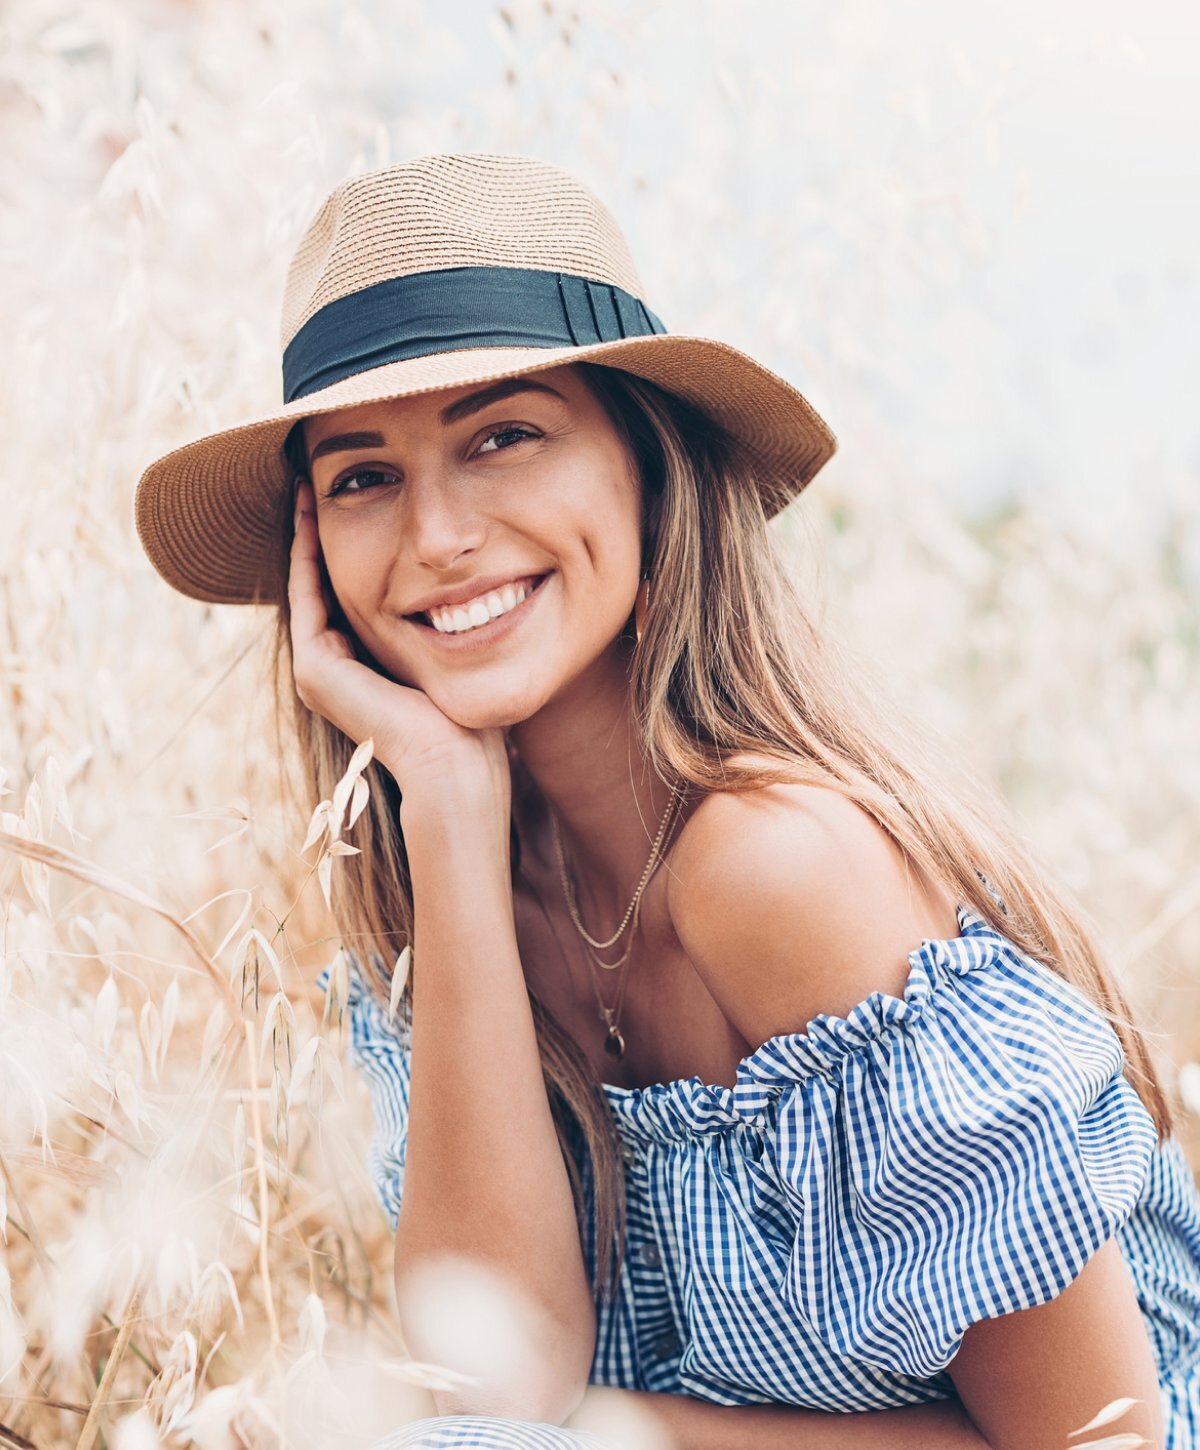 Grand Rapids BOTOX patient model in a blue dress and sun hat smiling